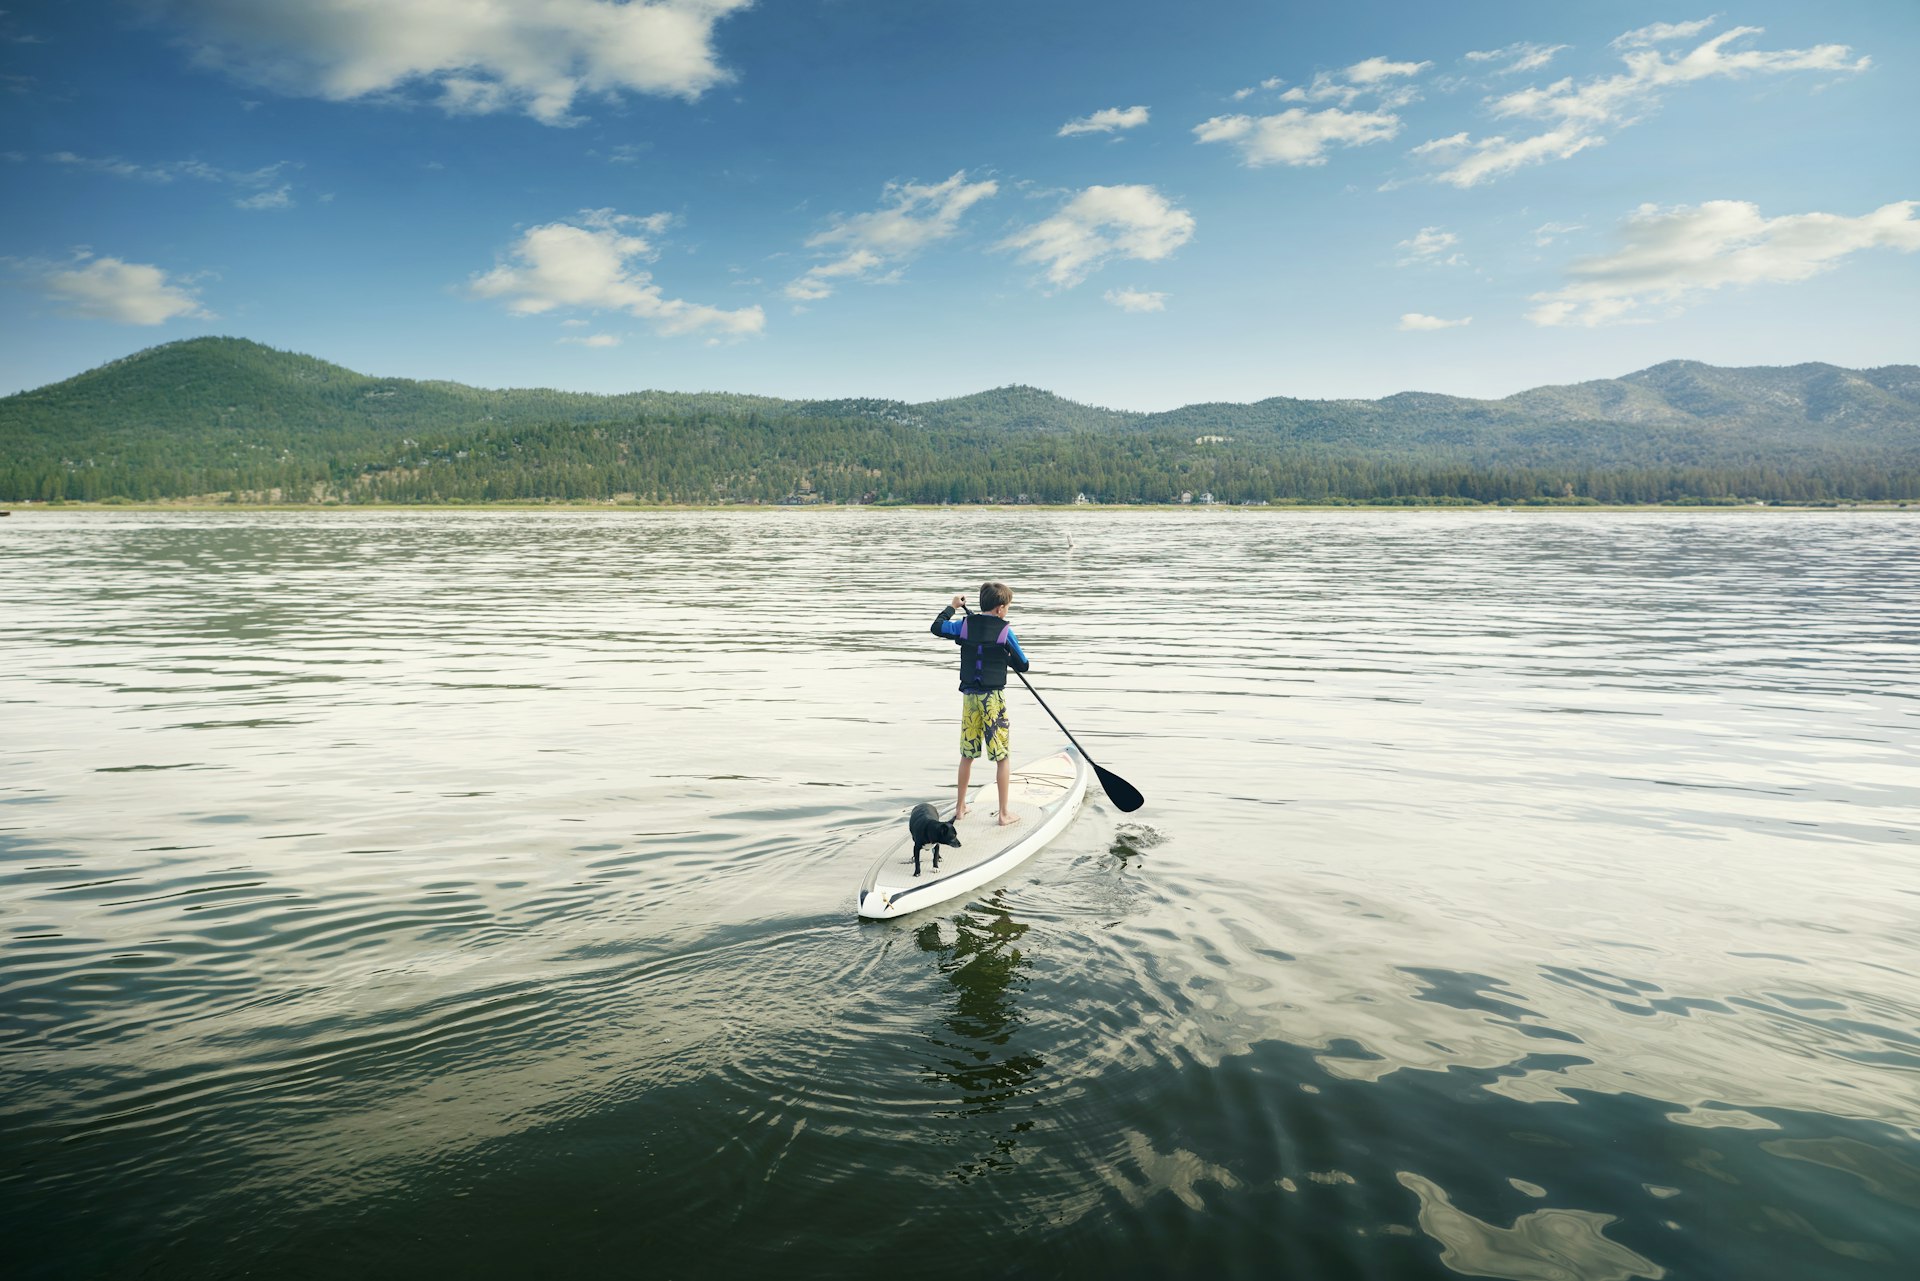 A boy and his dog paddle boarding.